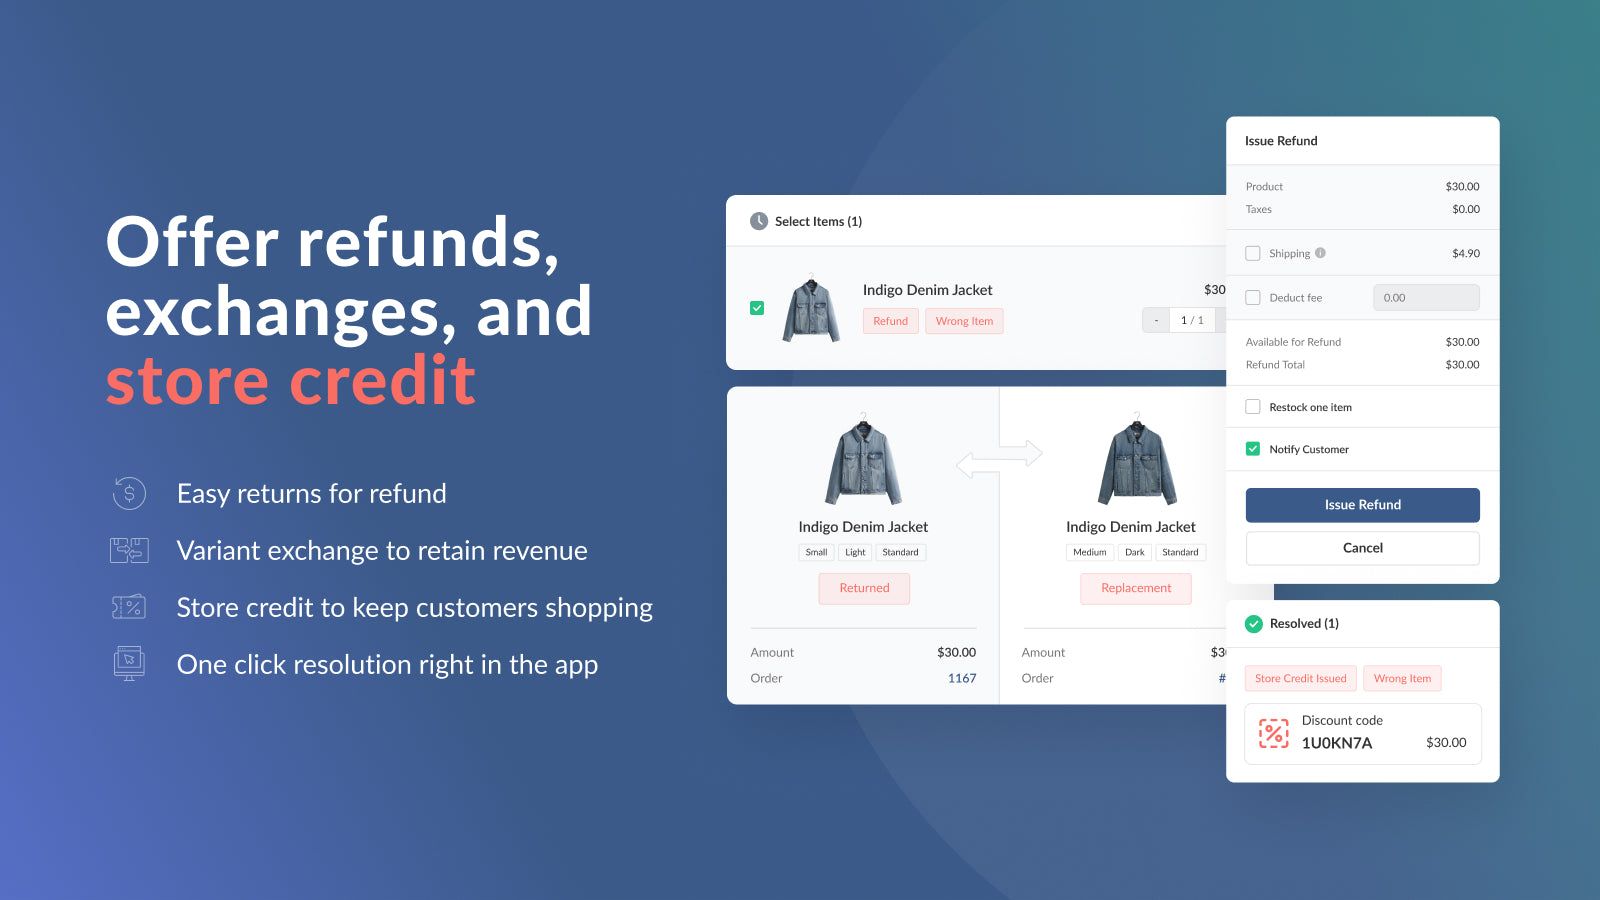 Automate return refunds, exchanges, and store credit in the app